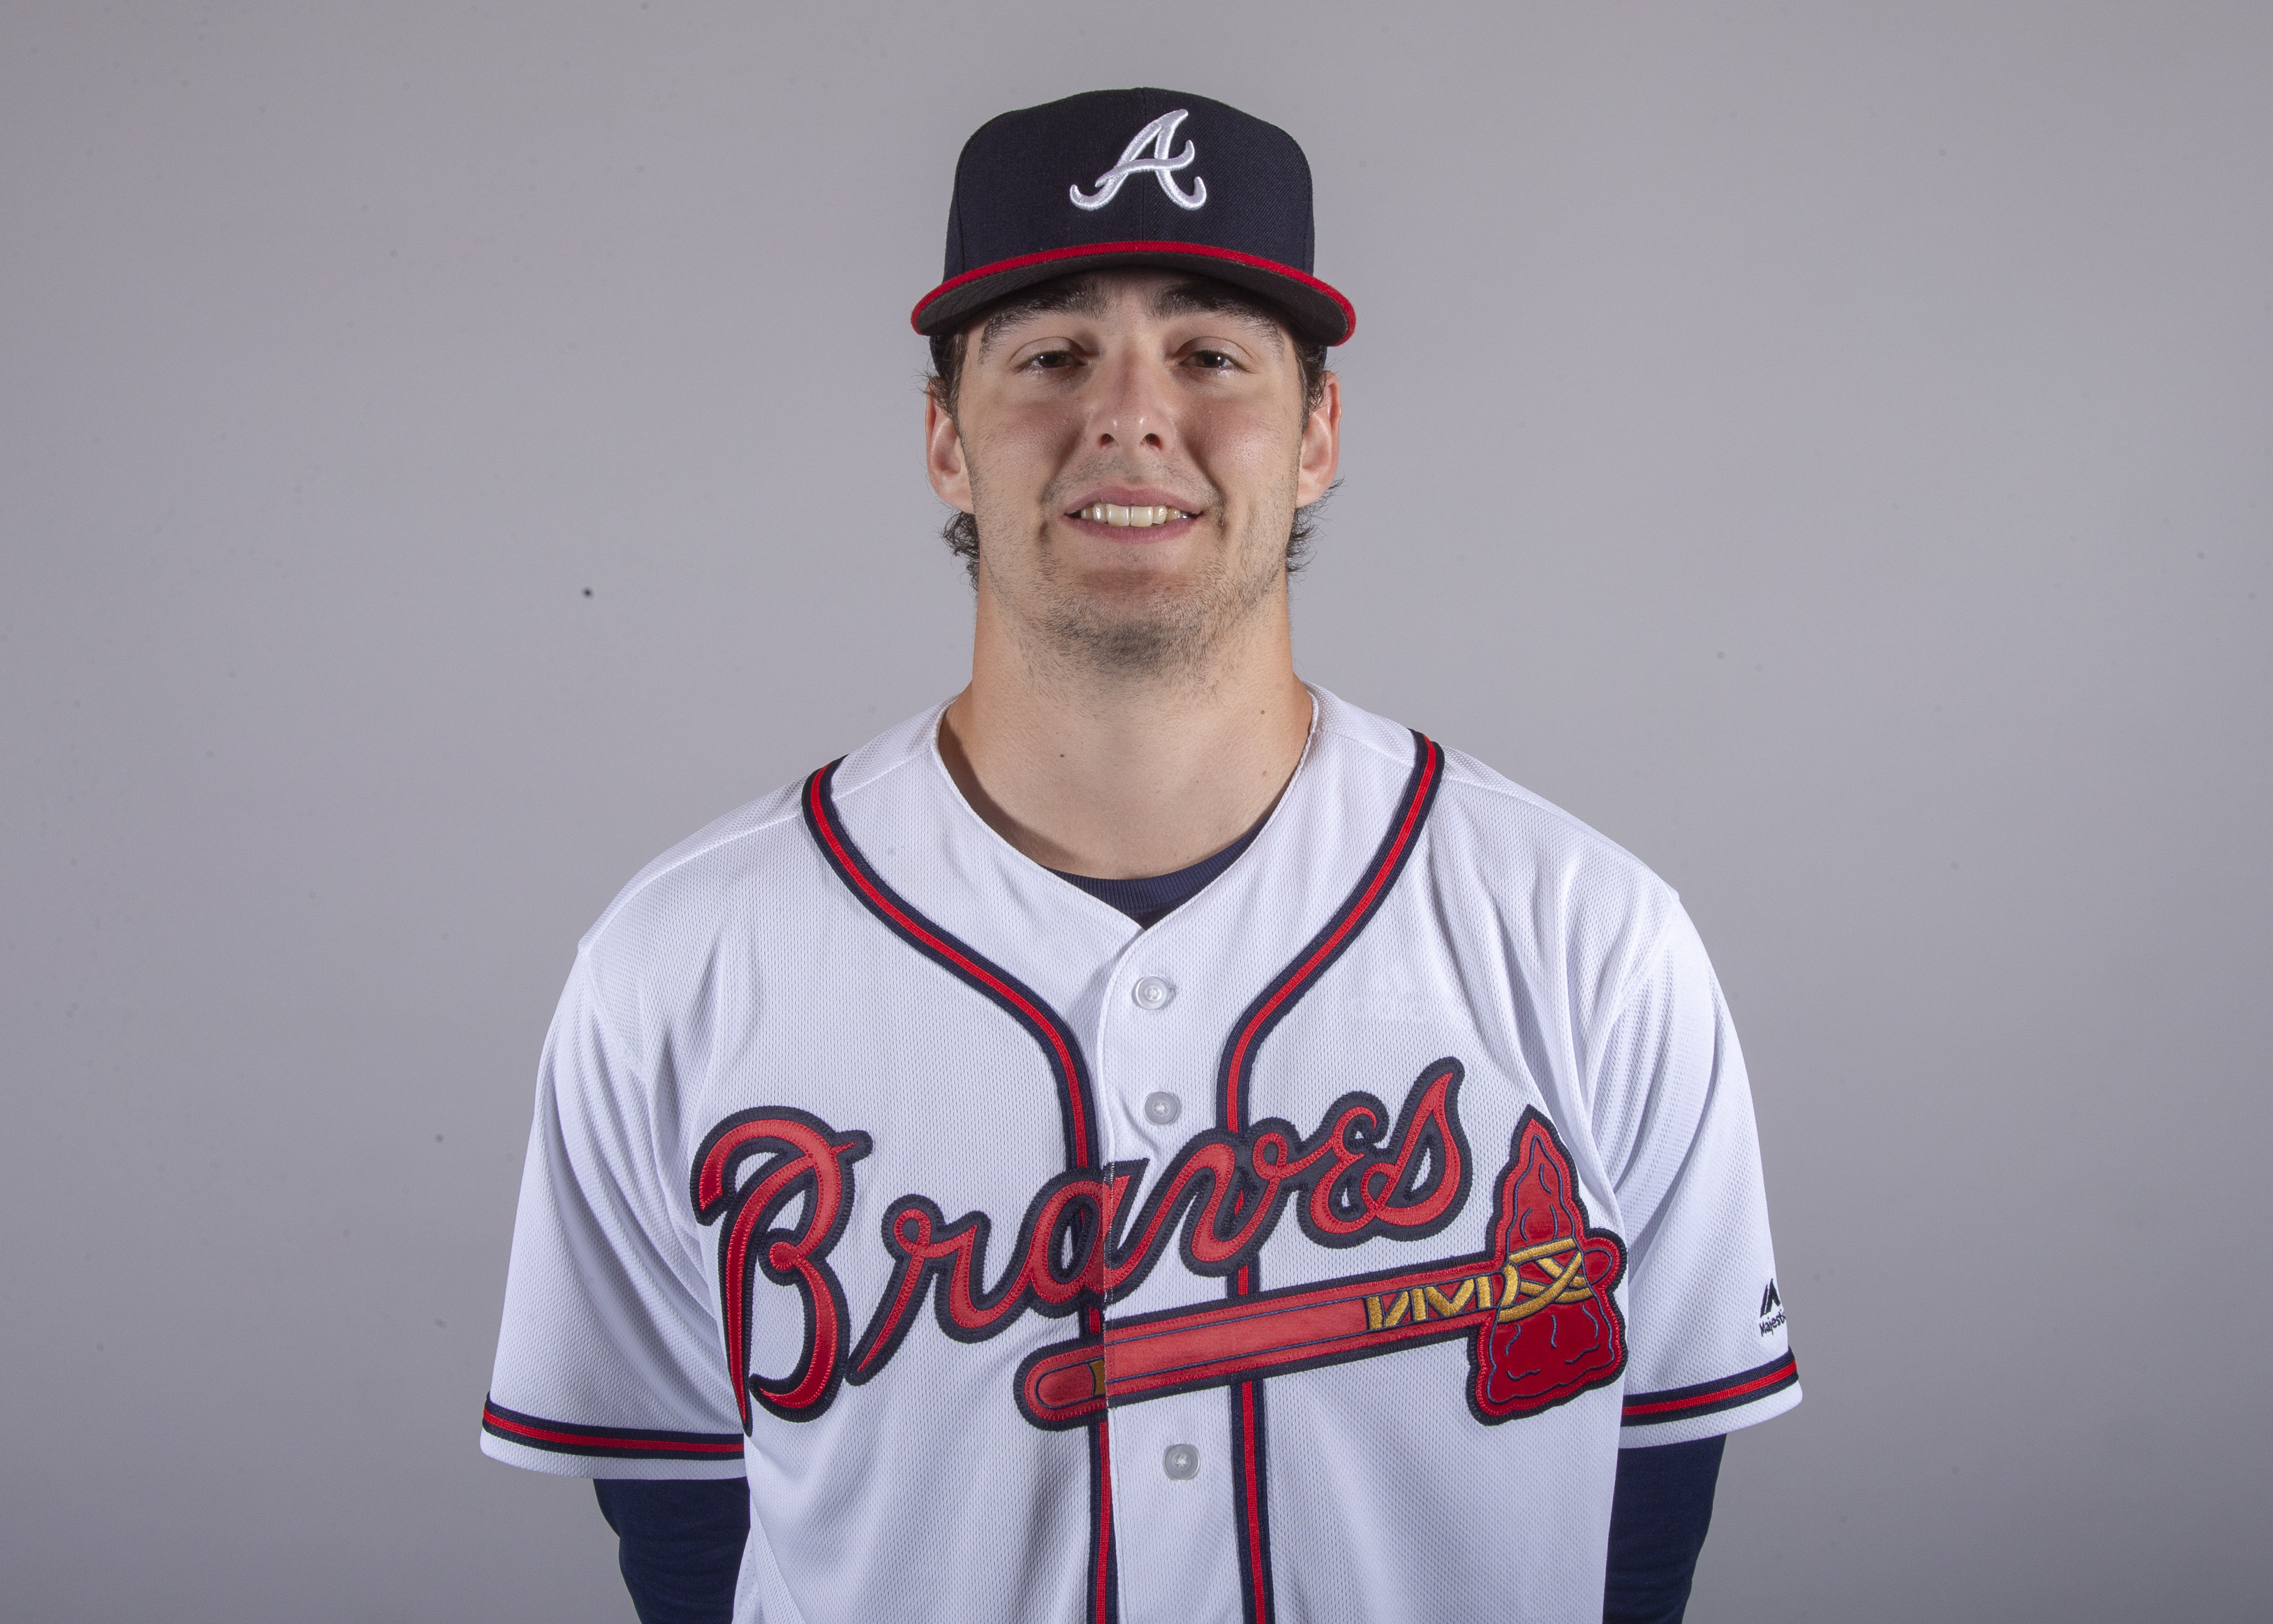 Braves pick pitcher Ian Anderson in MLB Draft